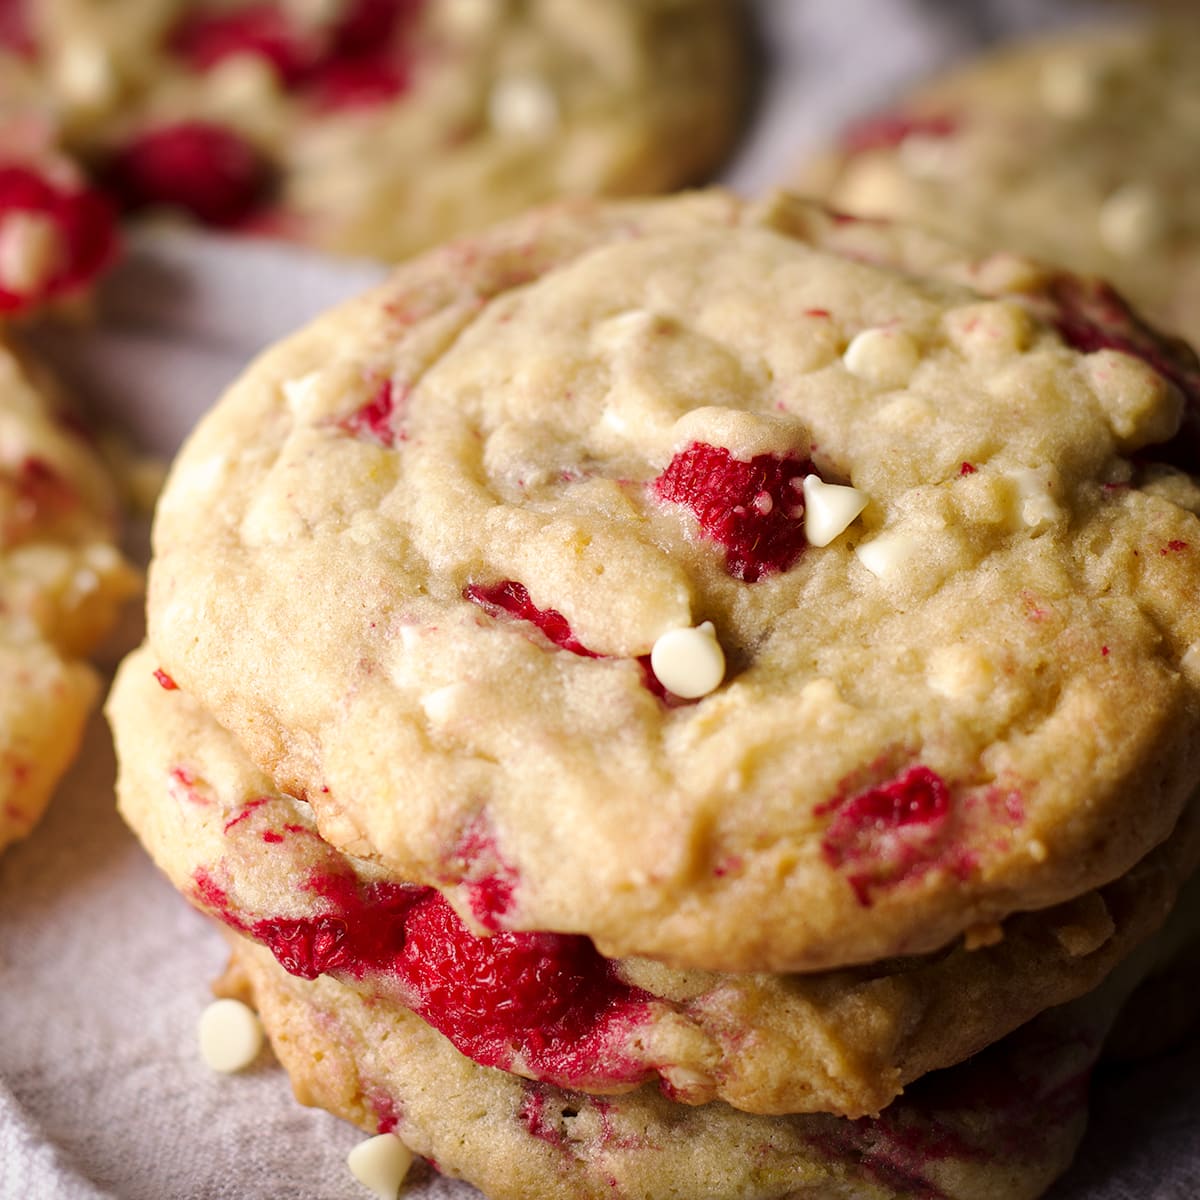 A close up photo of a stack of three white chocolate raspberry cookies.